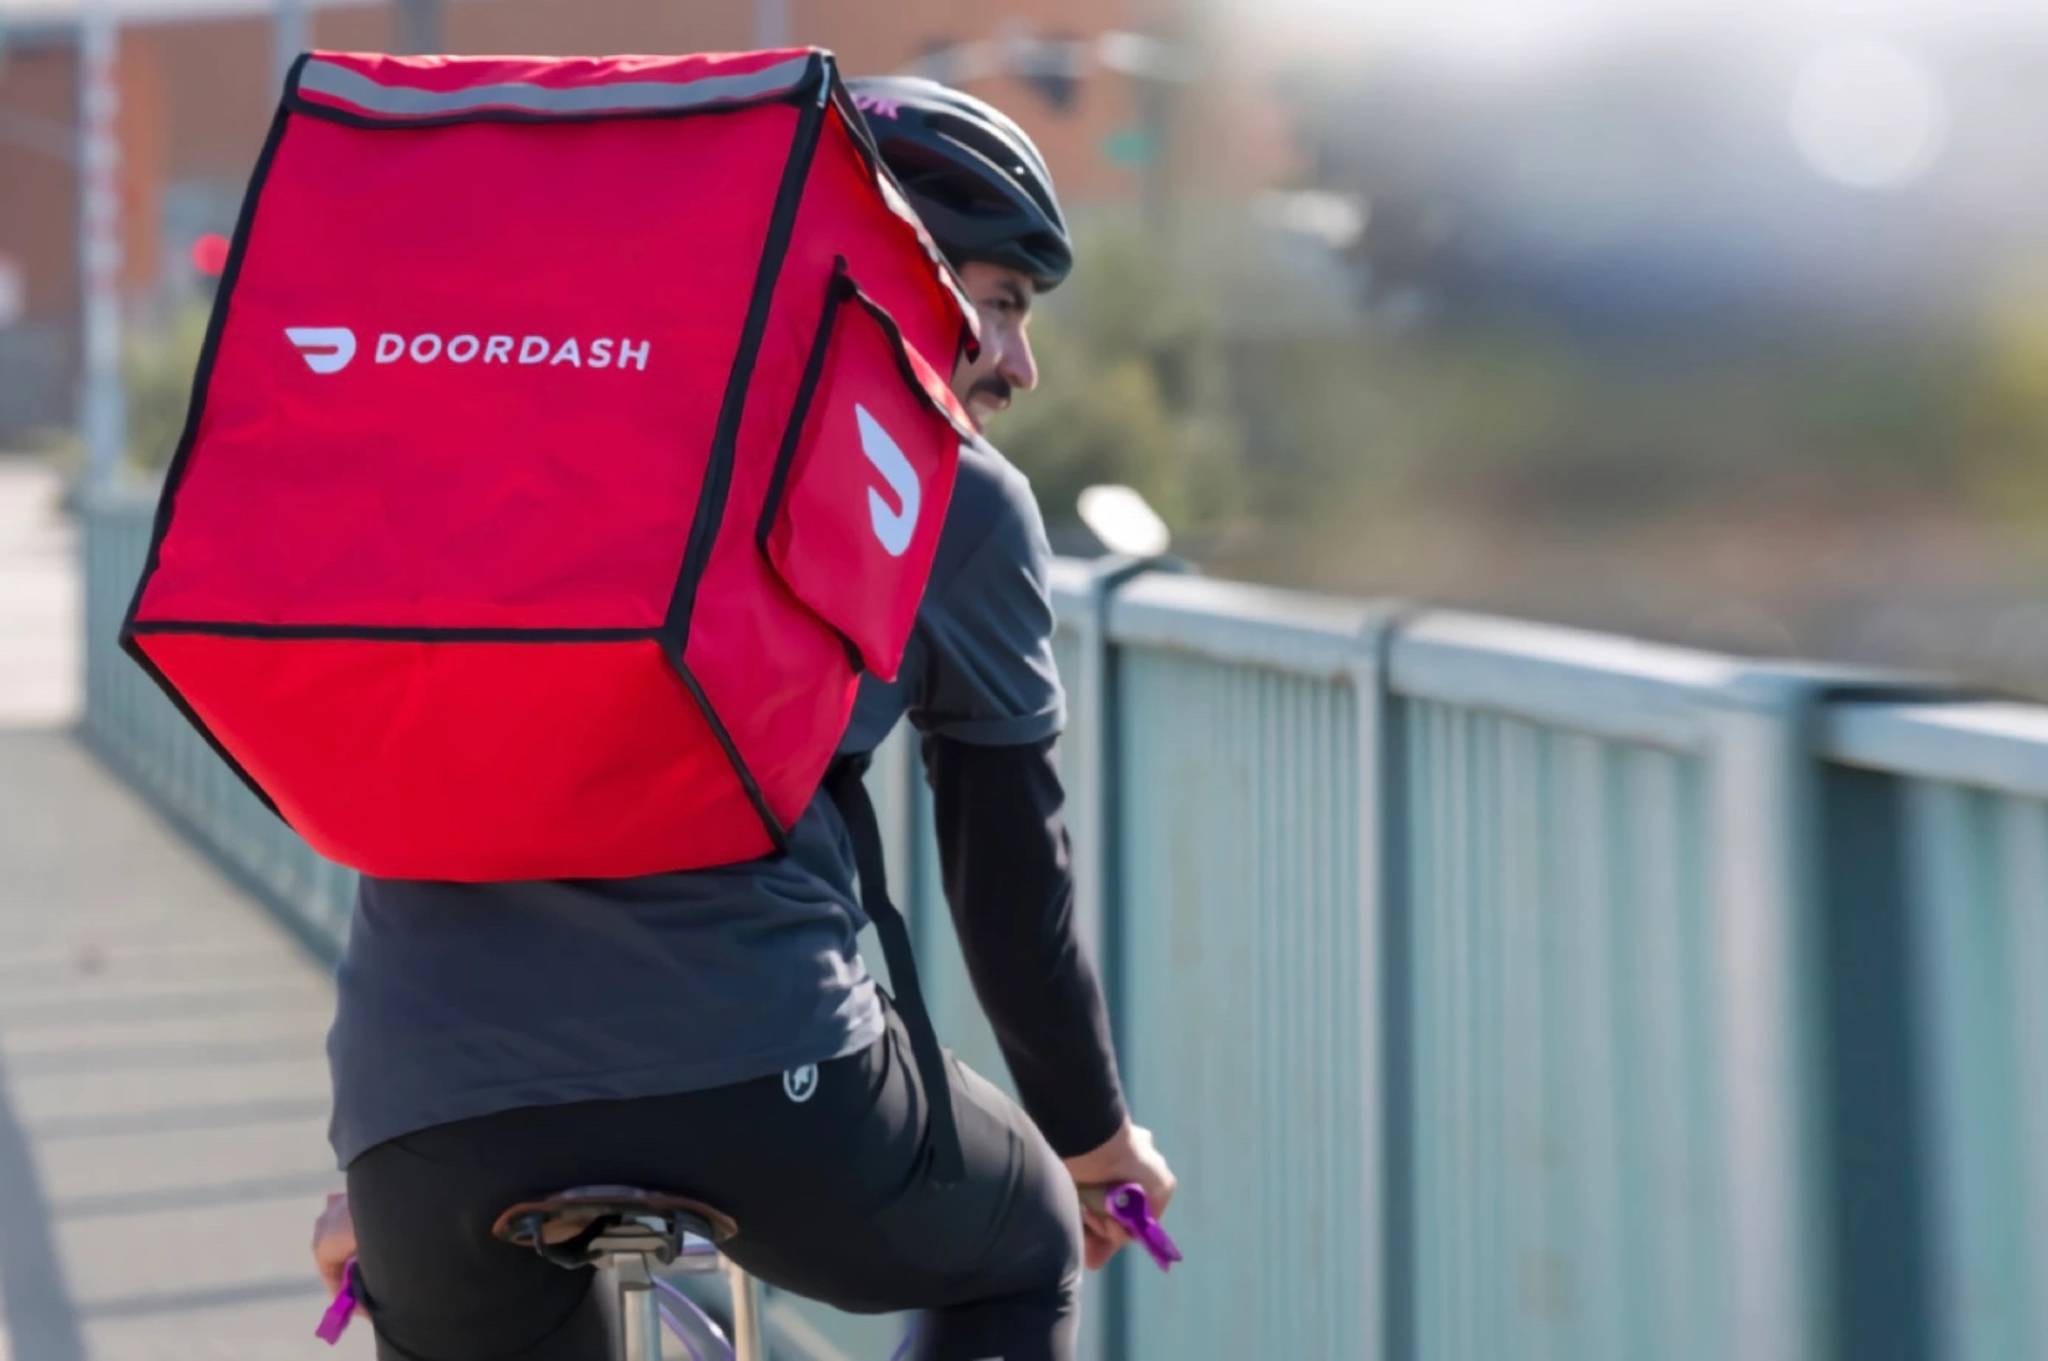 DoorDash gives gig workers more choice and security